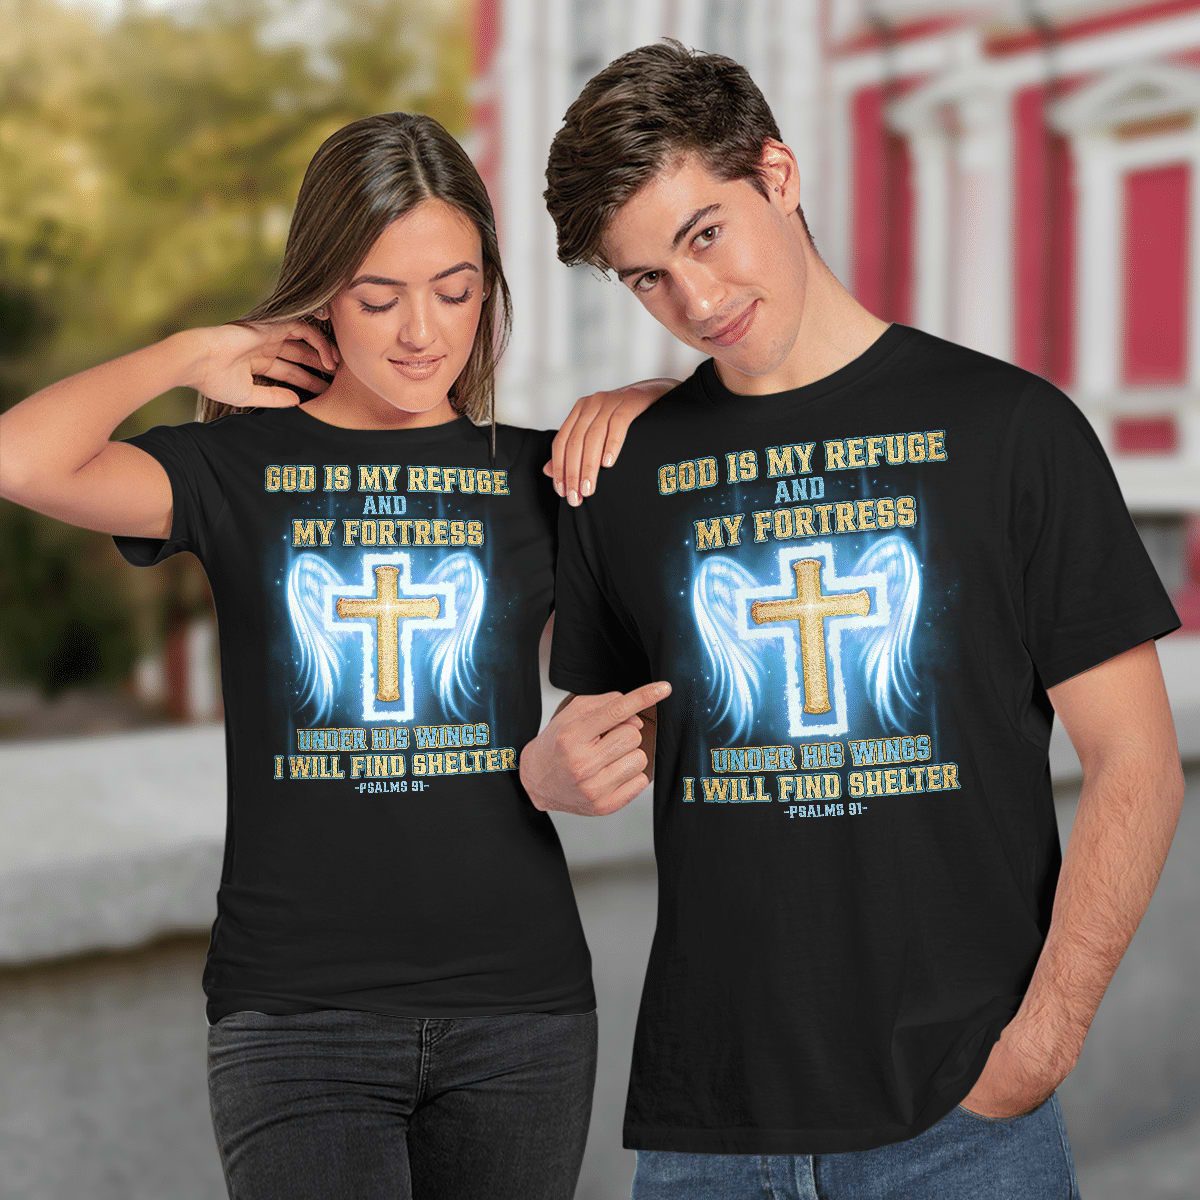 God Is My Refuge And My Fortress Under His Wings I Will Find Shelter T-Shirt, Jesus Sweatshirt Hoodie, Faith T-Shirt